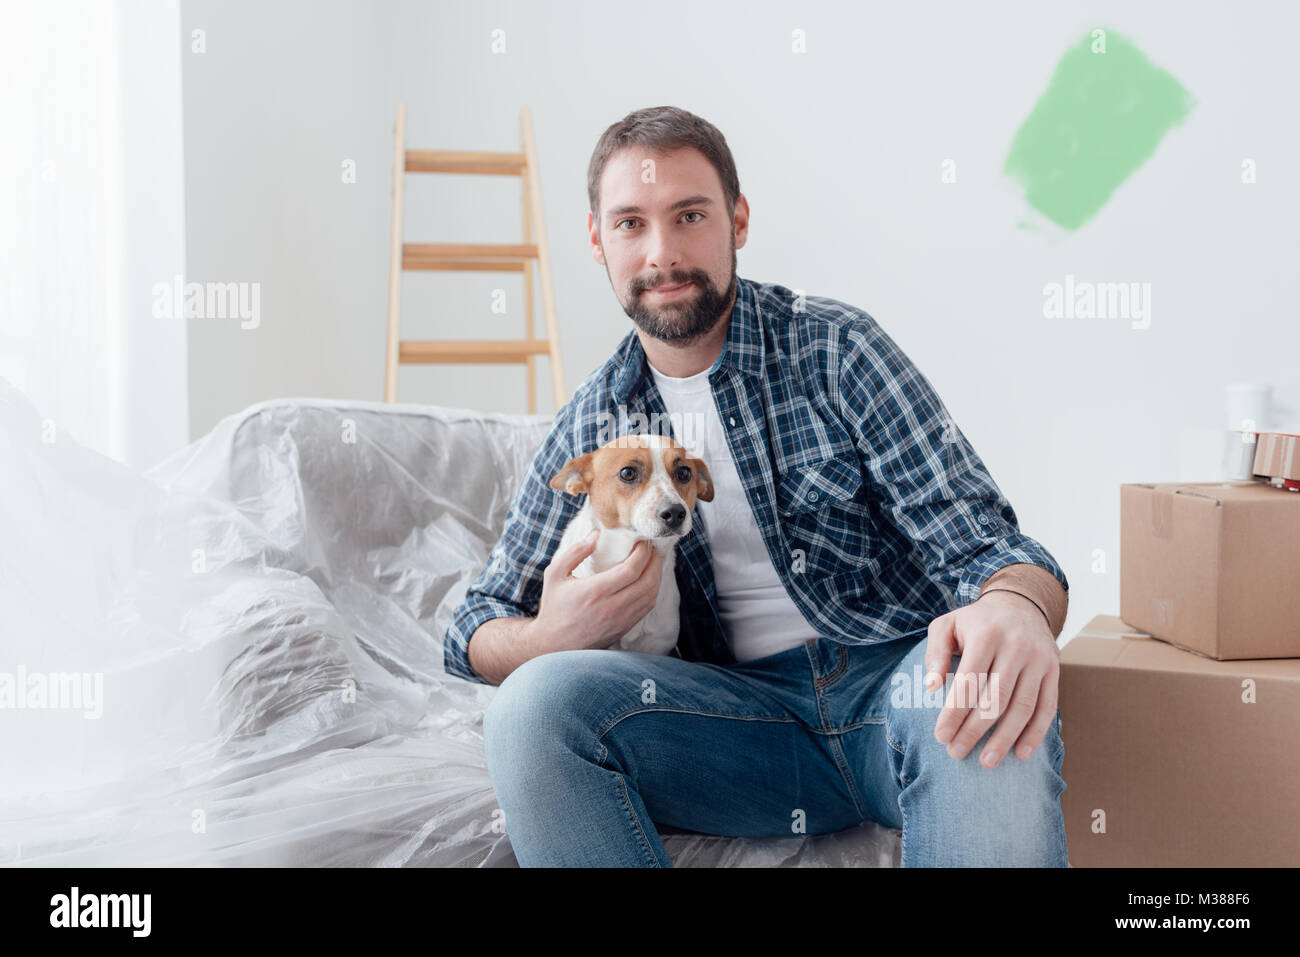 Happy dog owner posing with his pet in his new house during renovation, boxes and ladder on the background Stock Photo